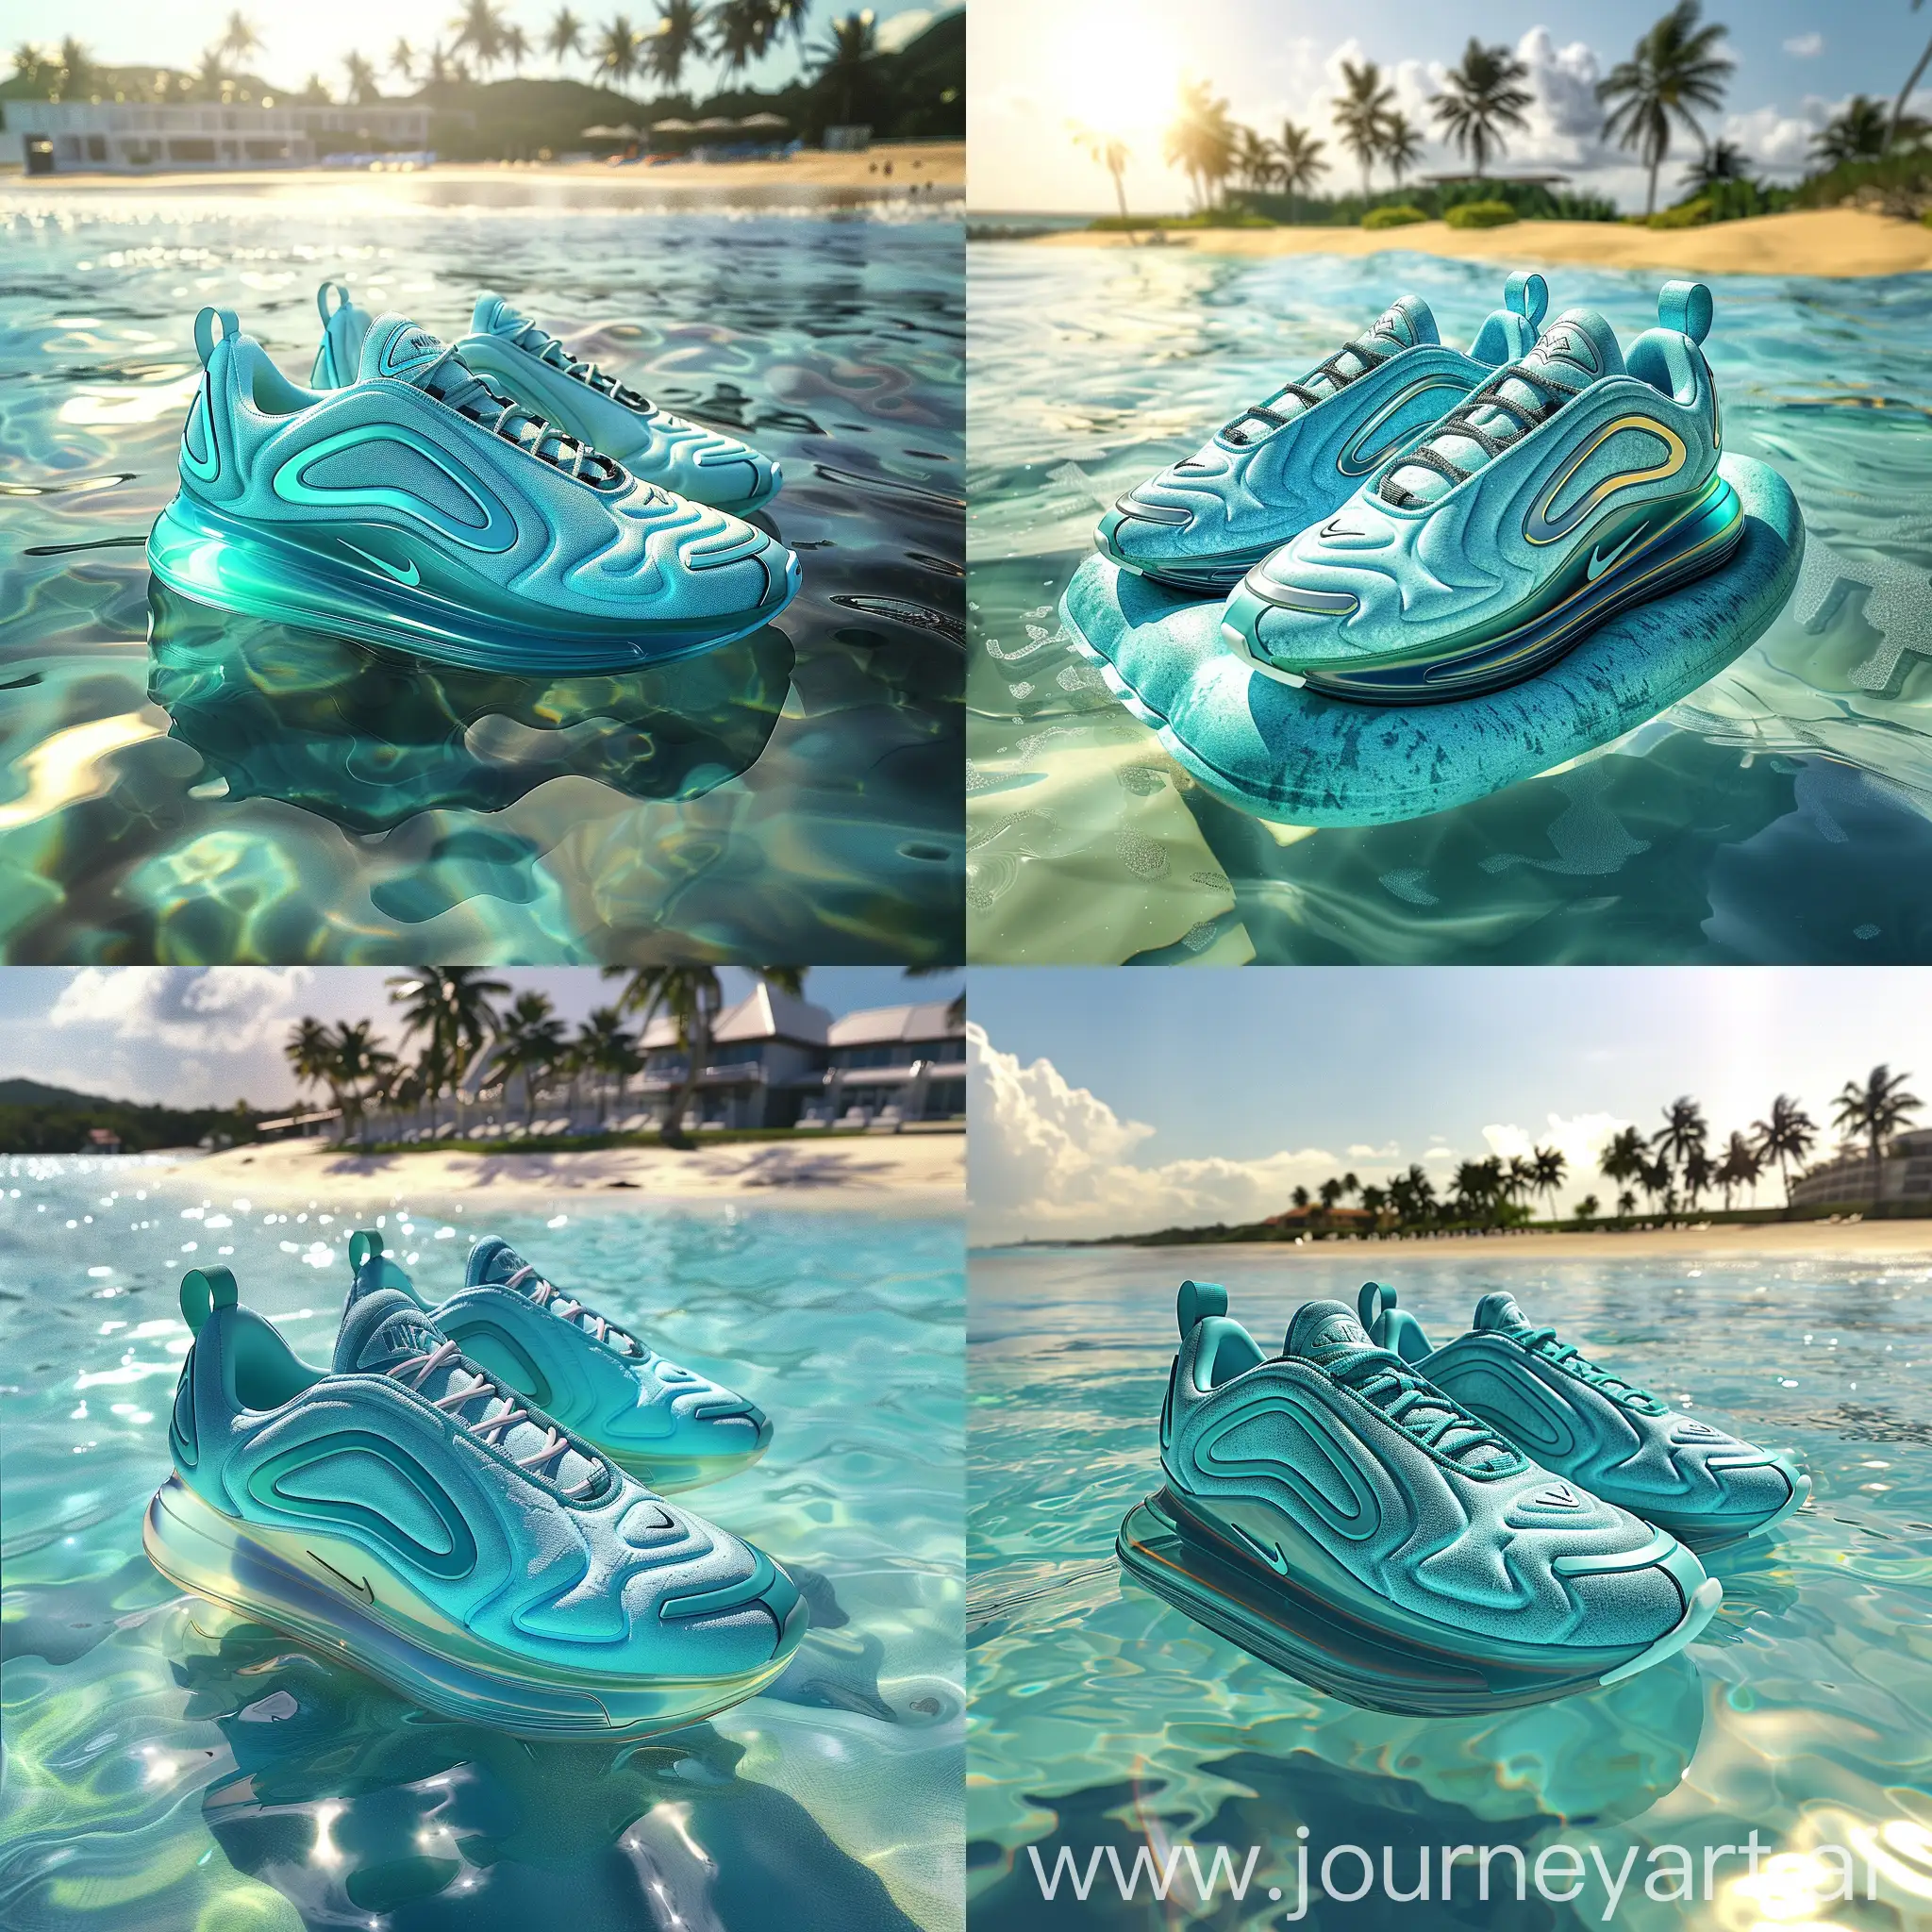 sneakers Nike Air Max 720, made of foam, high detail, turquoise and blue gradient colored, clean composition, 3d render, put on Inflatable mattress drifting on the water, azure, crystal-clear sea, with a beach and palms in the close distance, the sun, summer vibes, beautiful art work, intricate detail, fashion shoot,